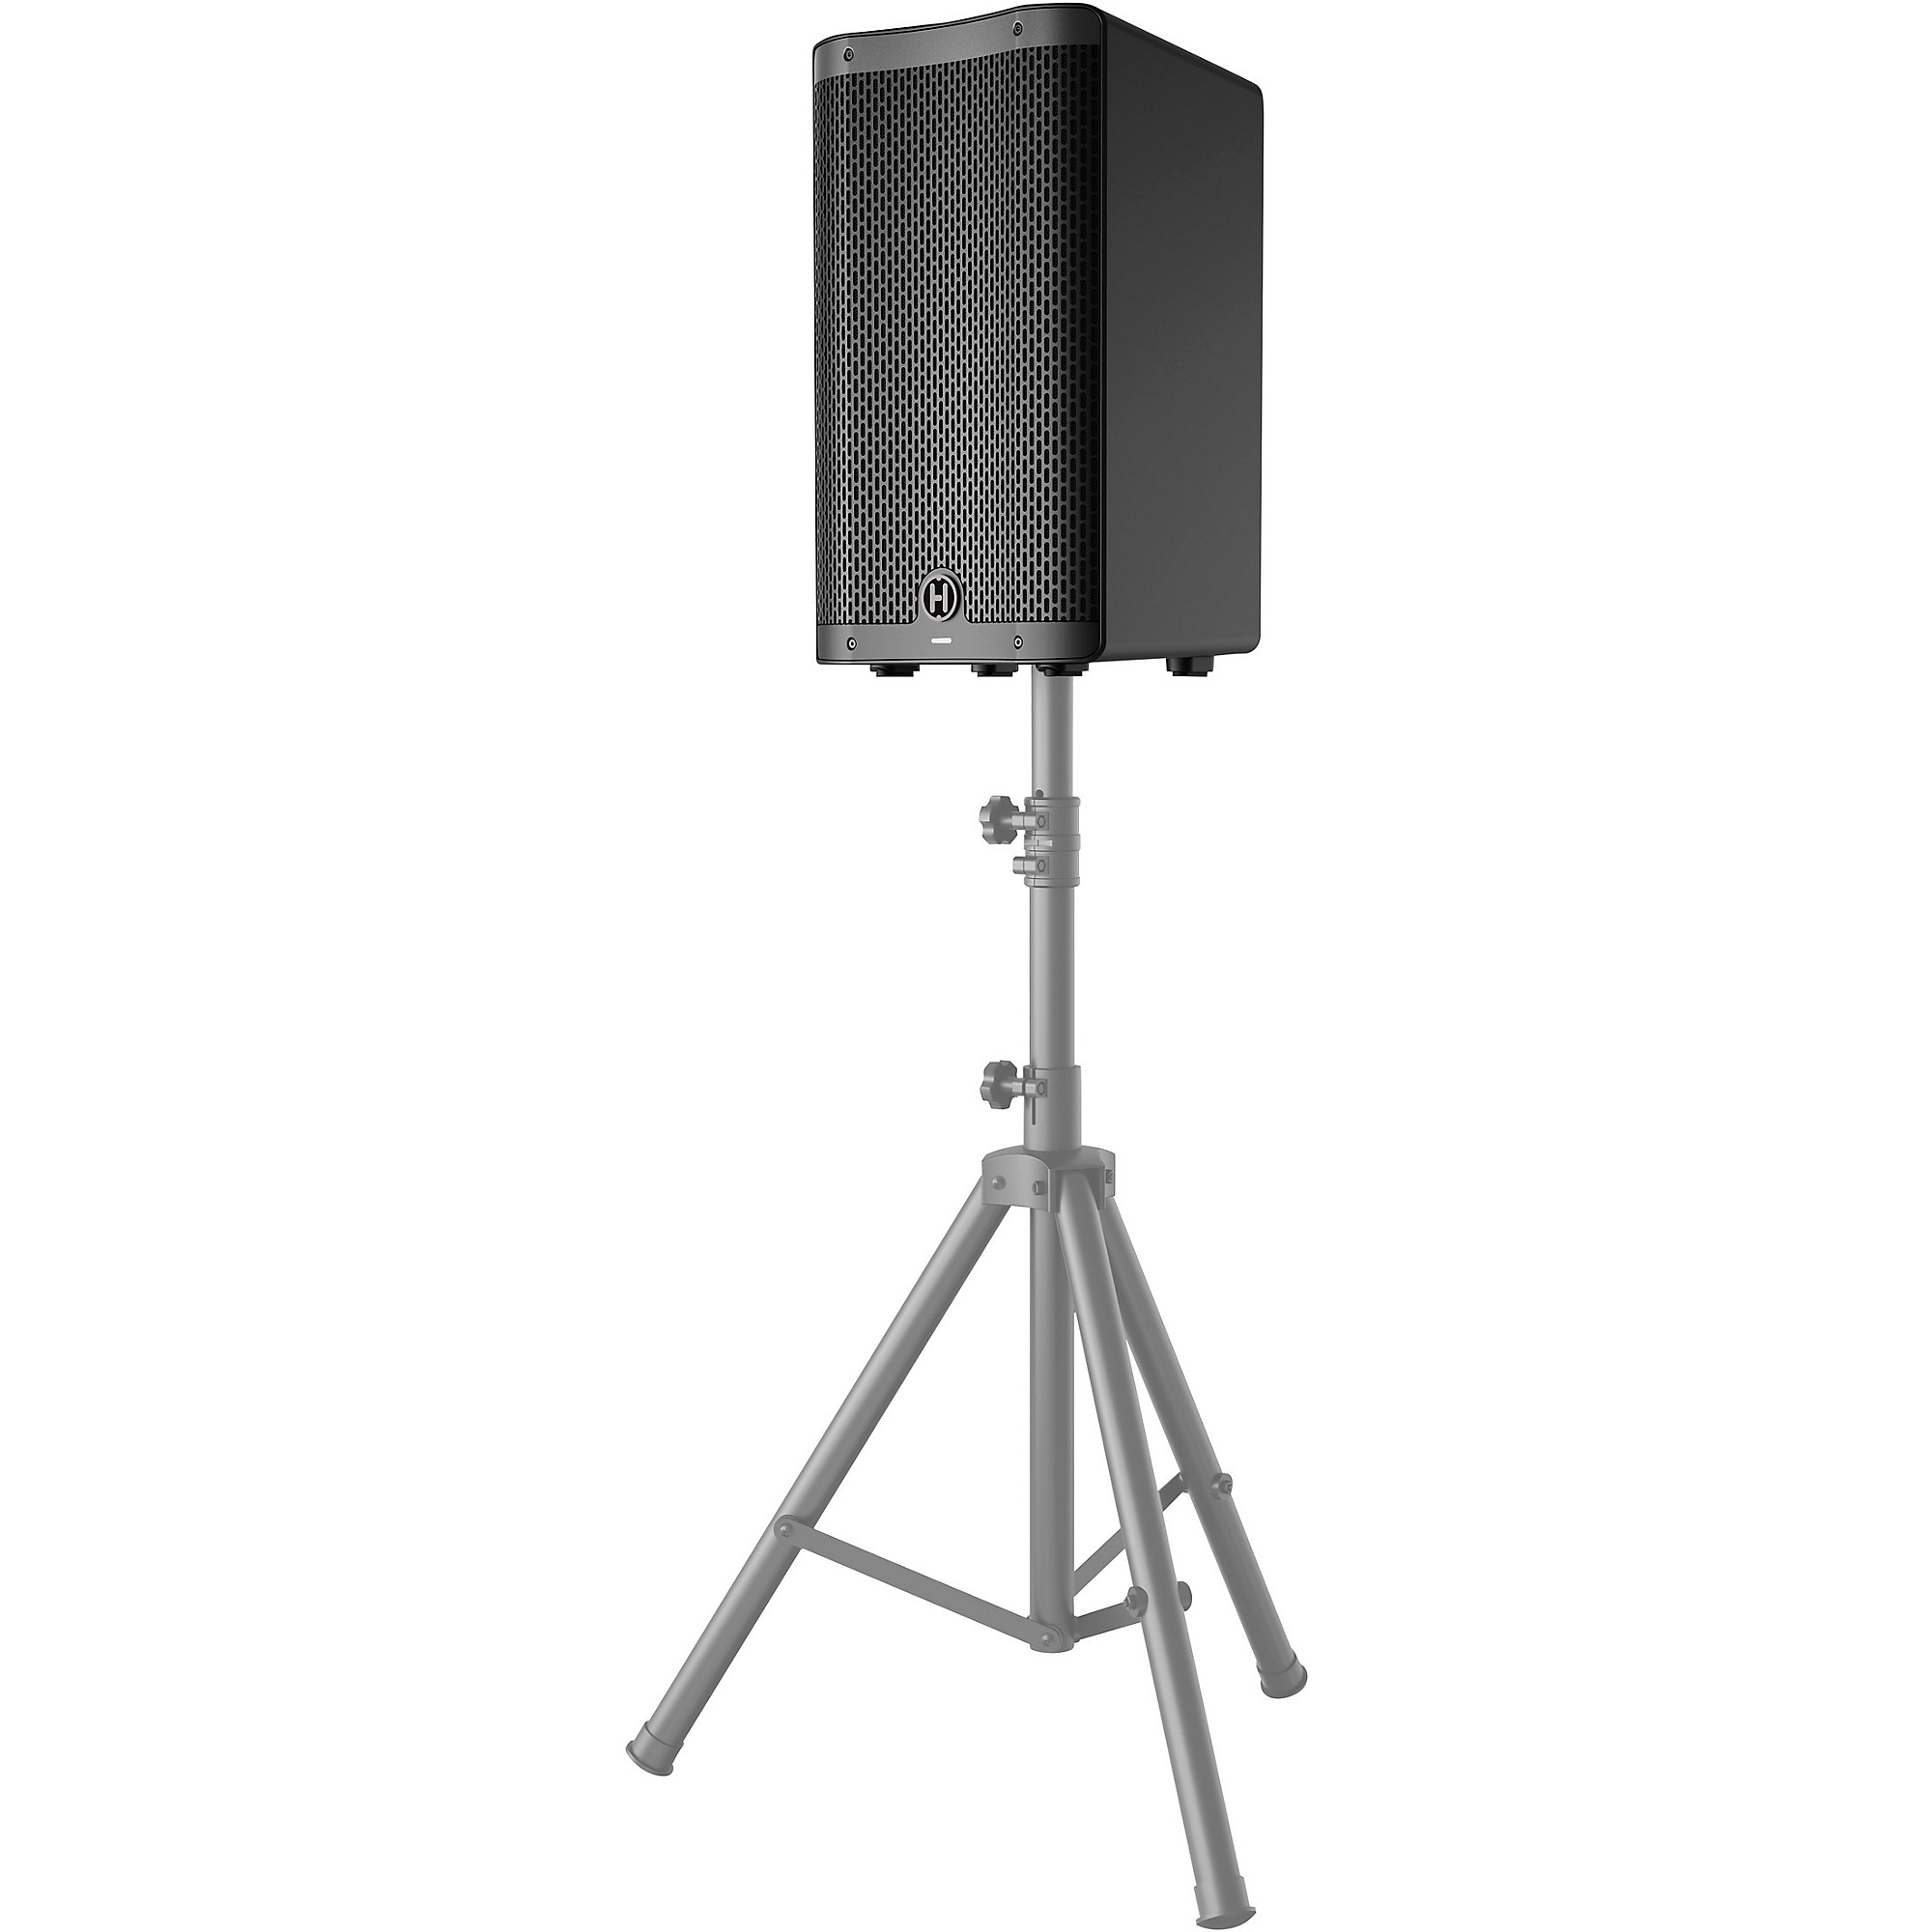 Harbinger Vari V2410 Powered 10 2-Way Loudspeaker with Bluetooth, DSP and Smart Stereo